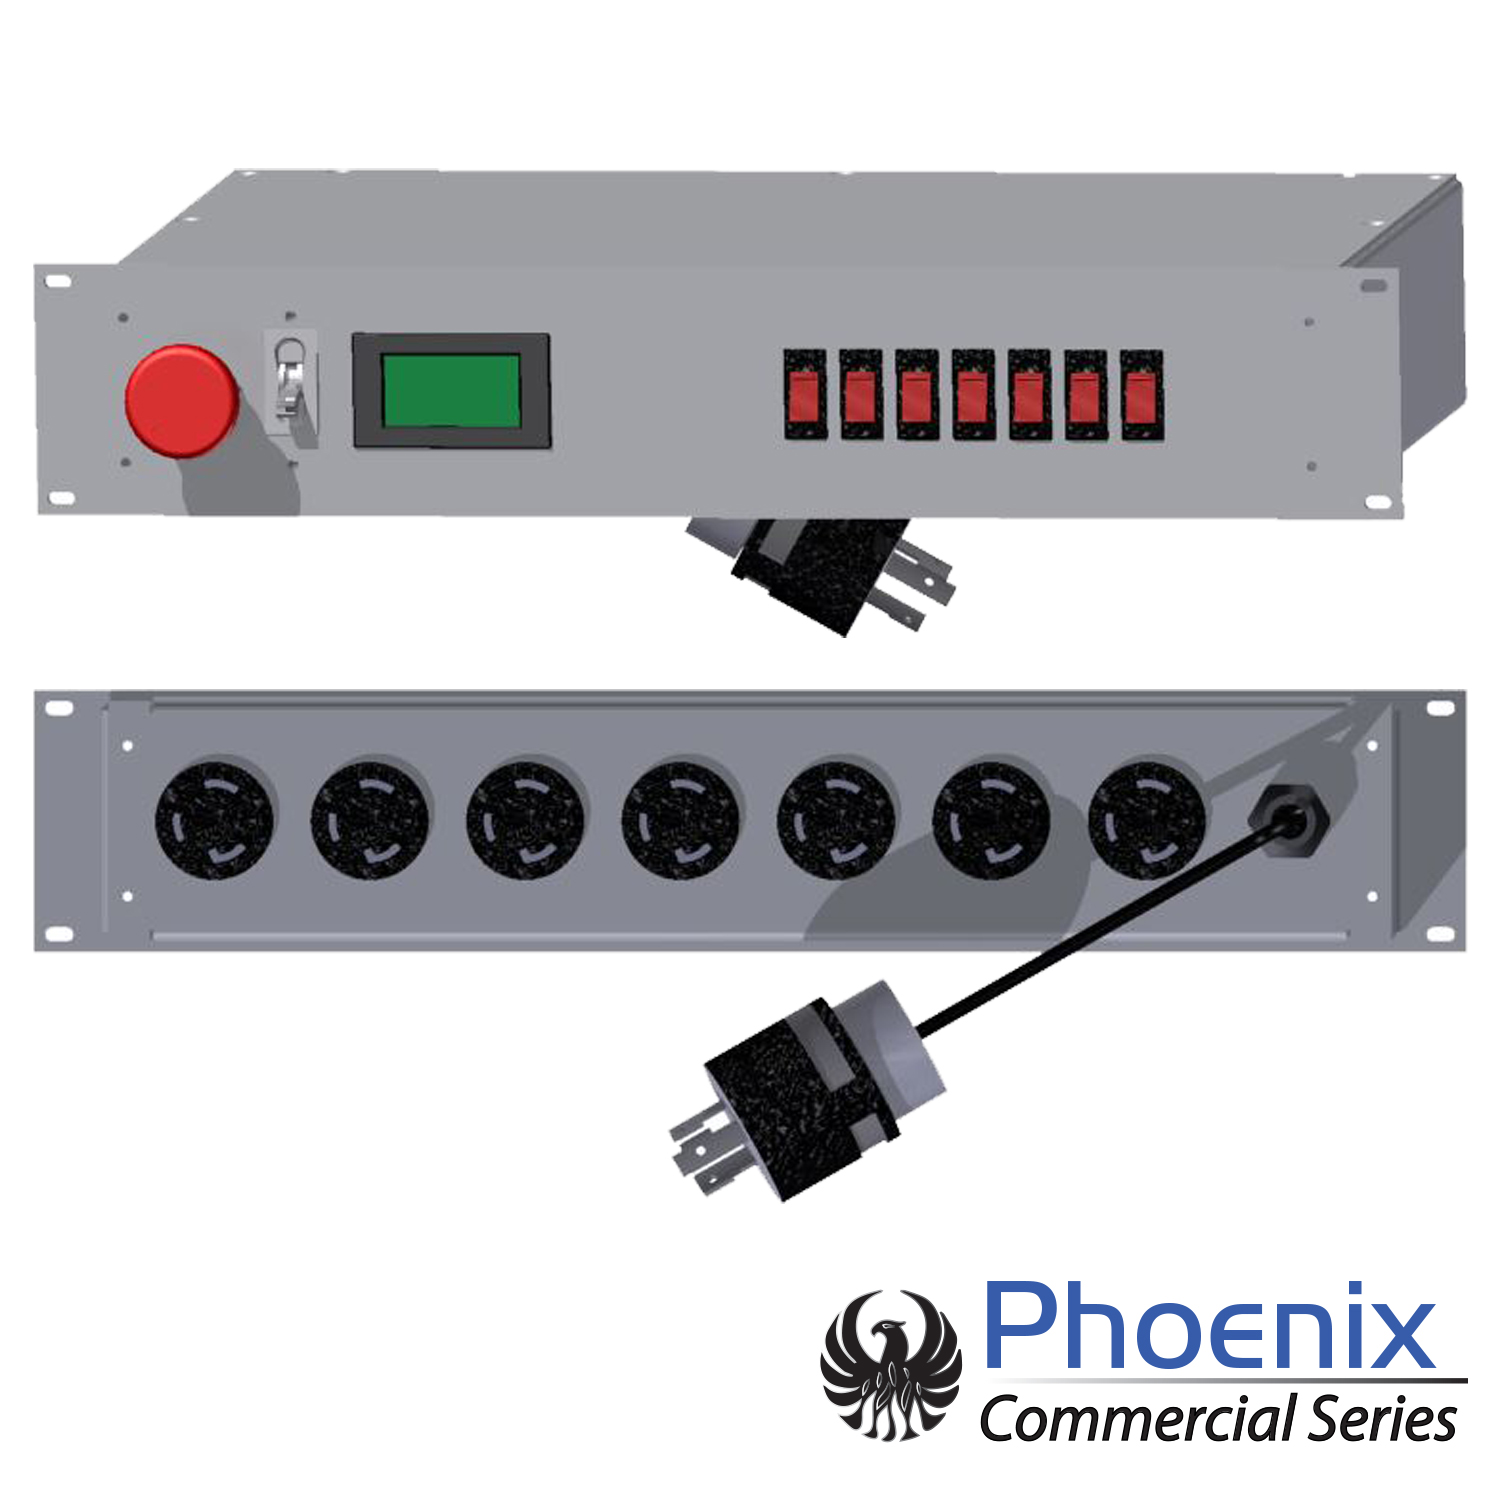 Commercial Rack Mount PDUs, Metered PDUs